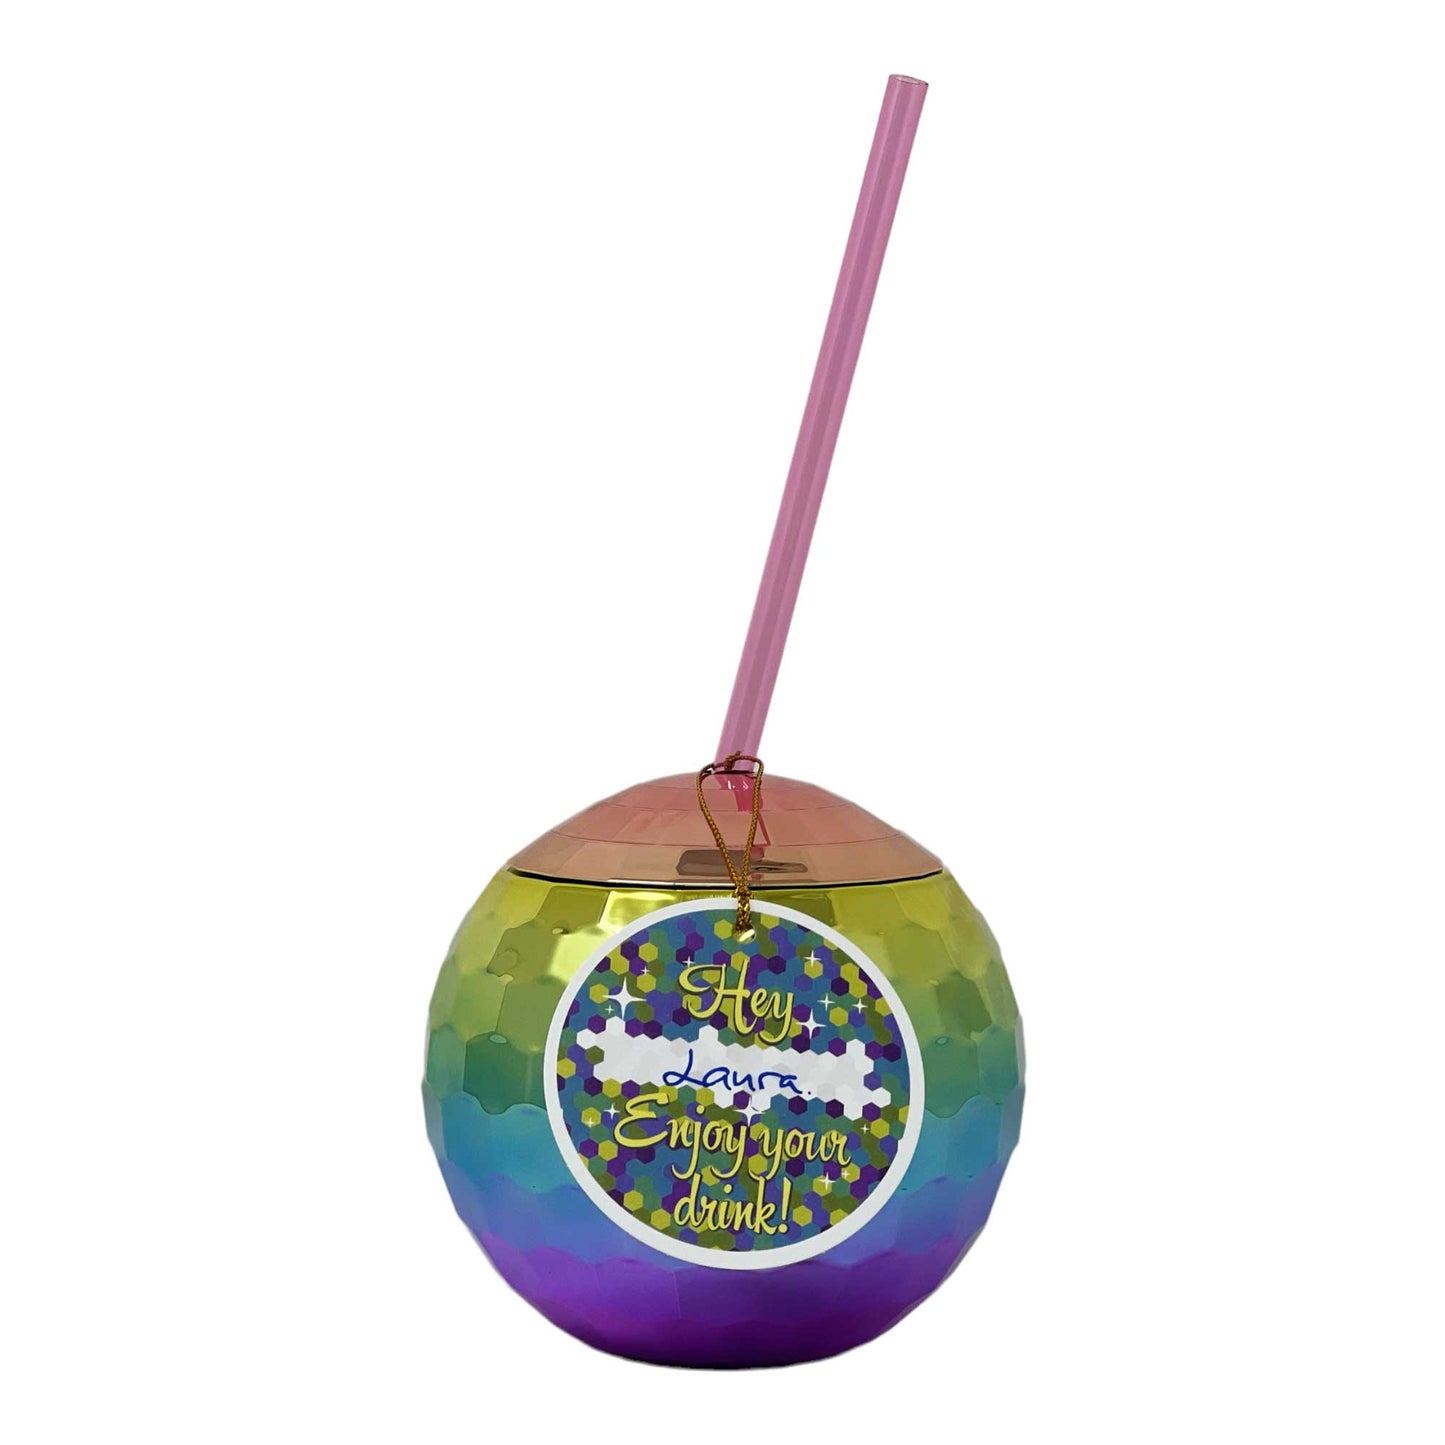 Rainbow Name Tag for Tumblers with Straw - Set of 24 - Help Individuals Identify Their Drink Cups